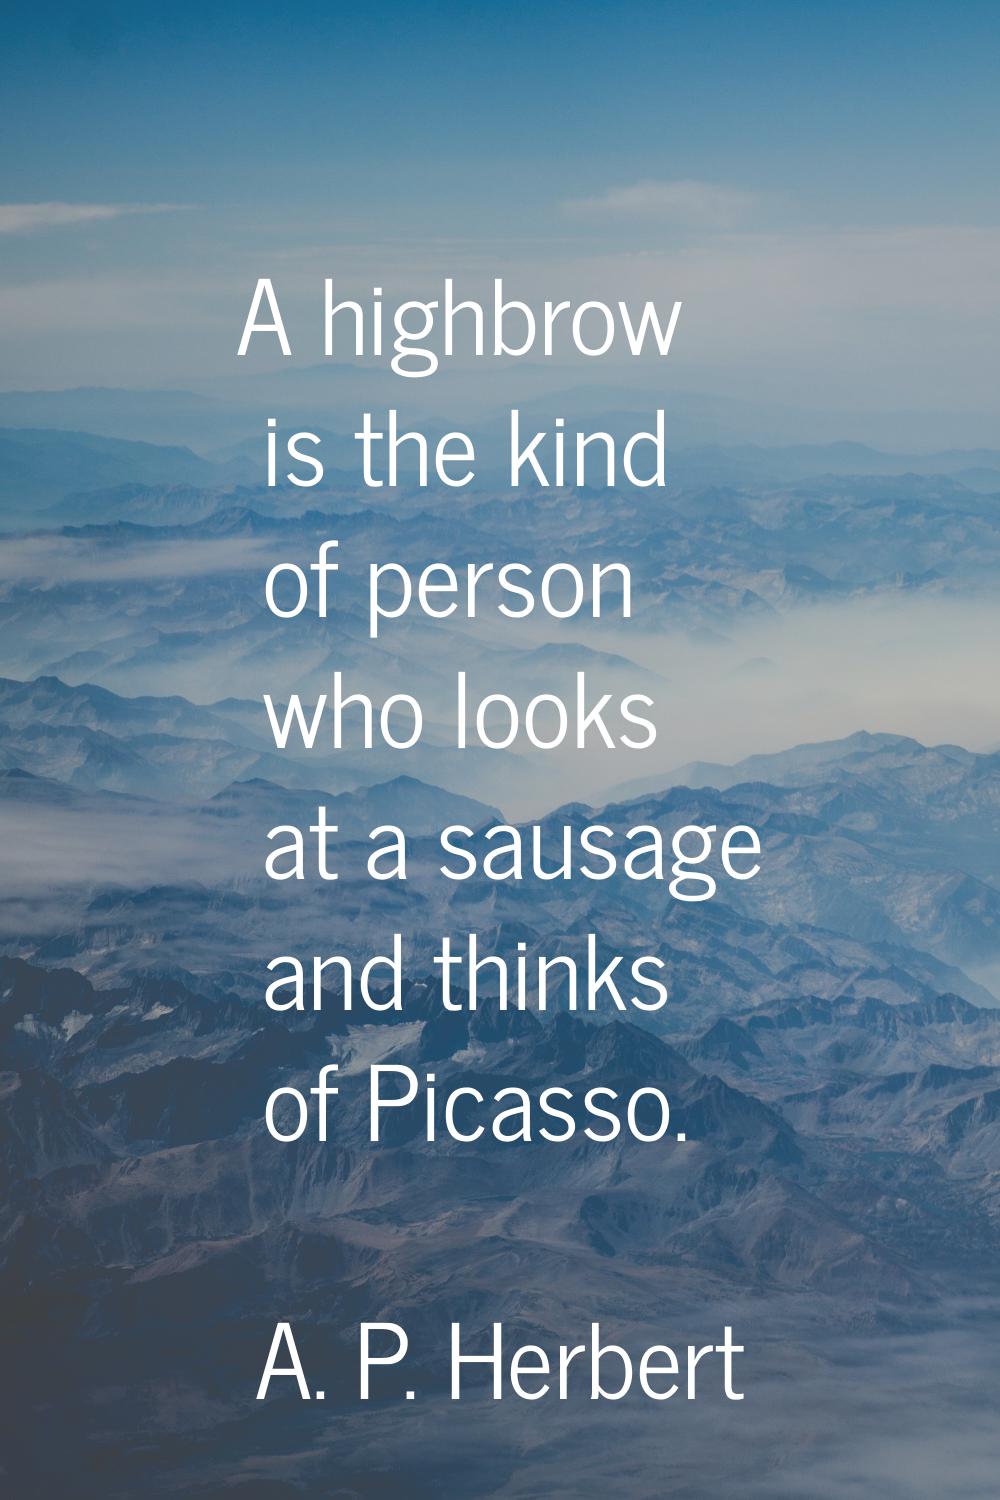 A highbrow is the kind of person who looks at a sausage and thinks of Picasso.